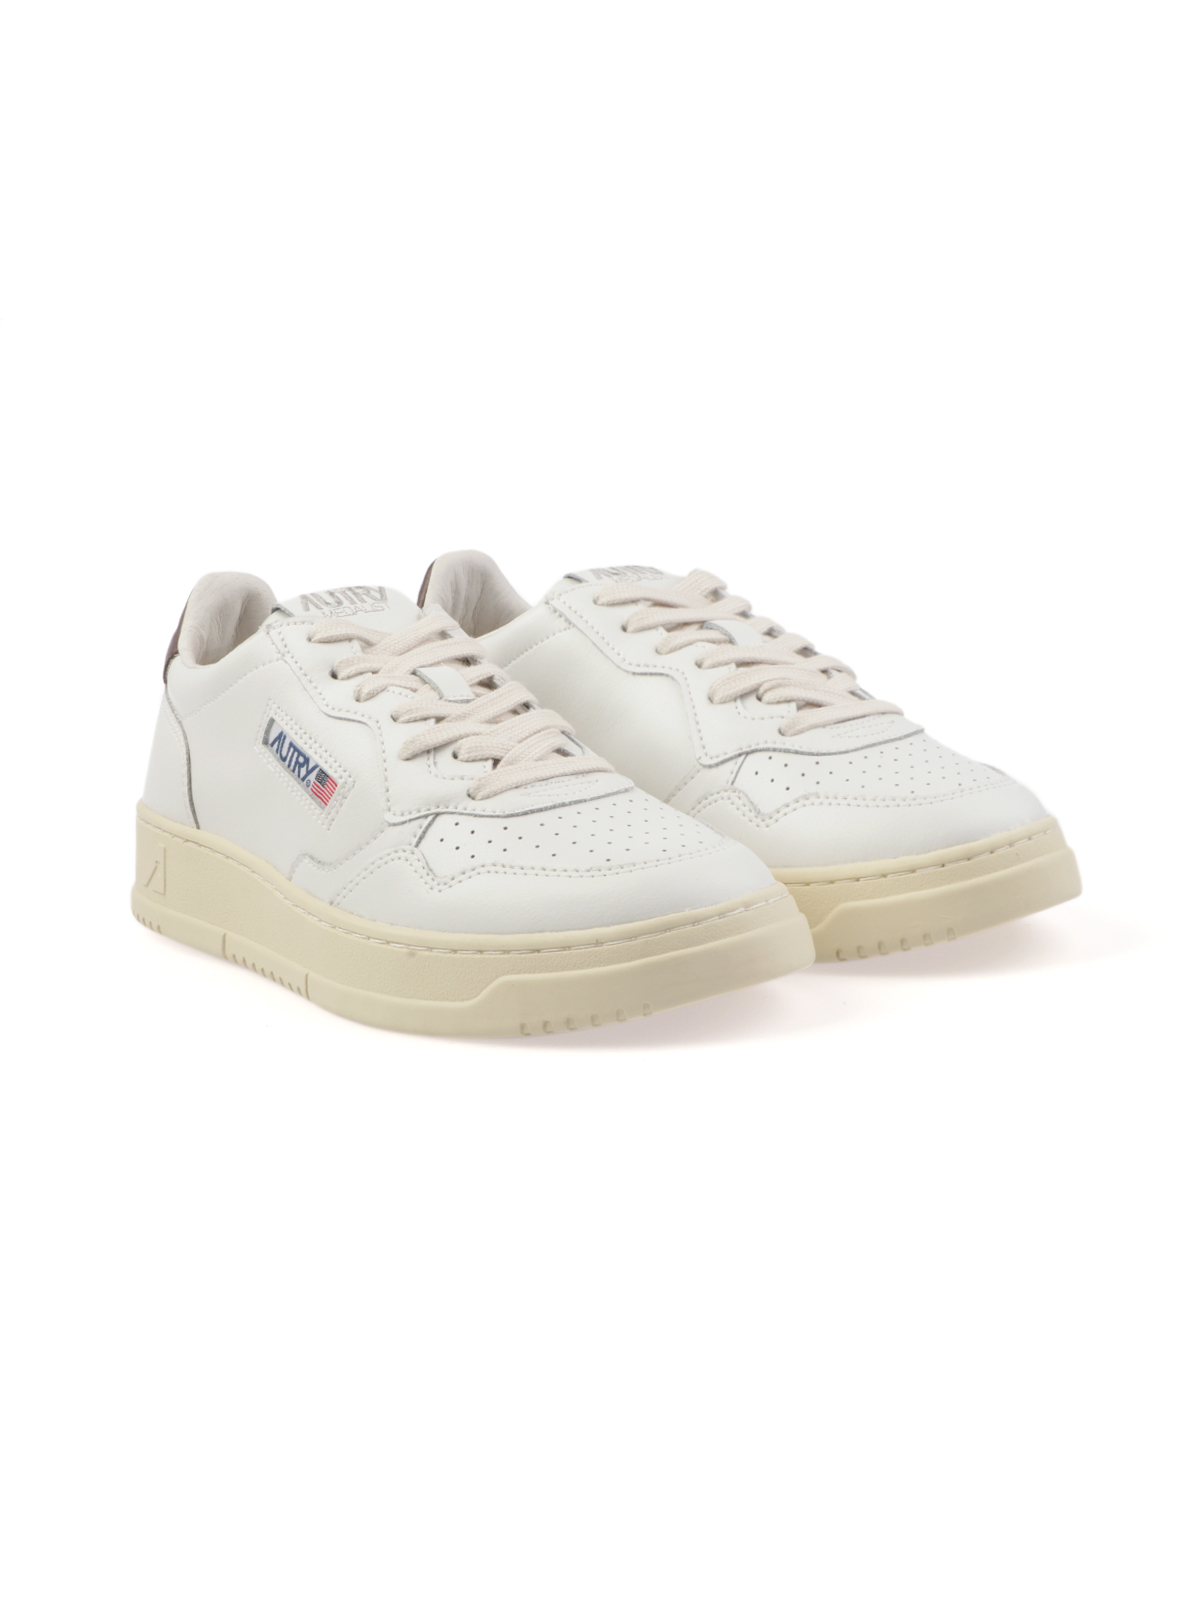 Picture of AUTRY | Sneakers Uomo Medalist Low in Pelle